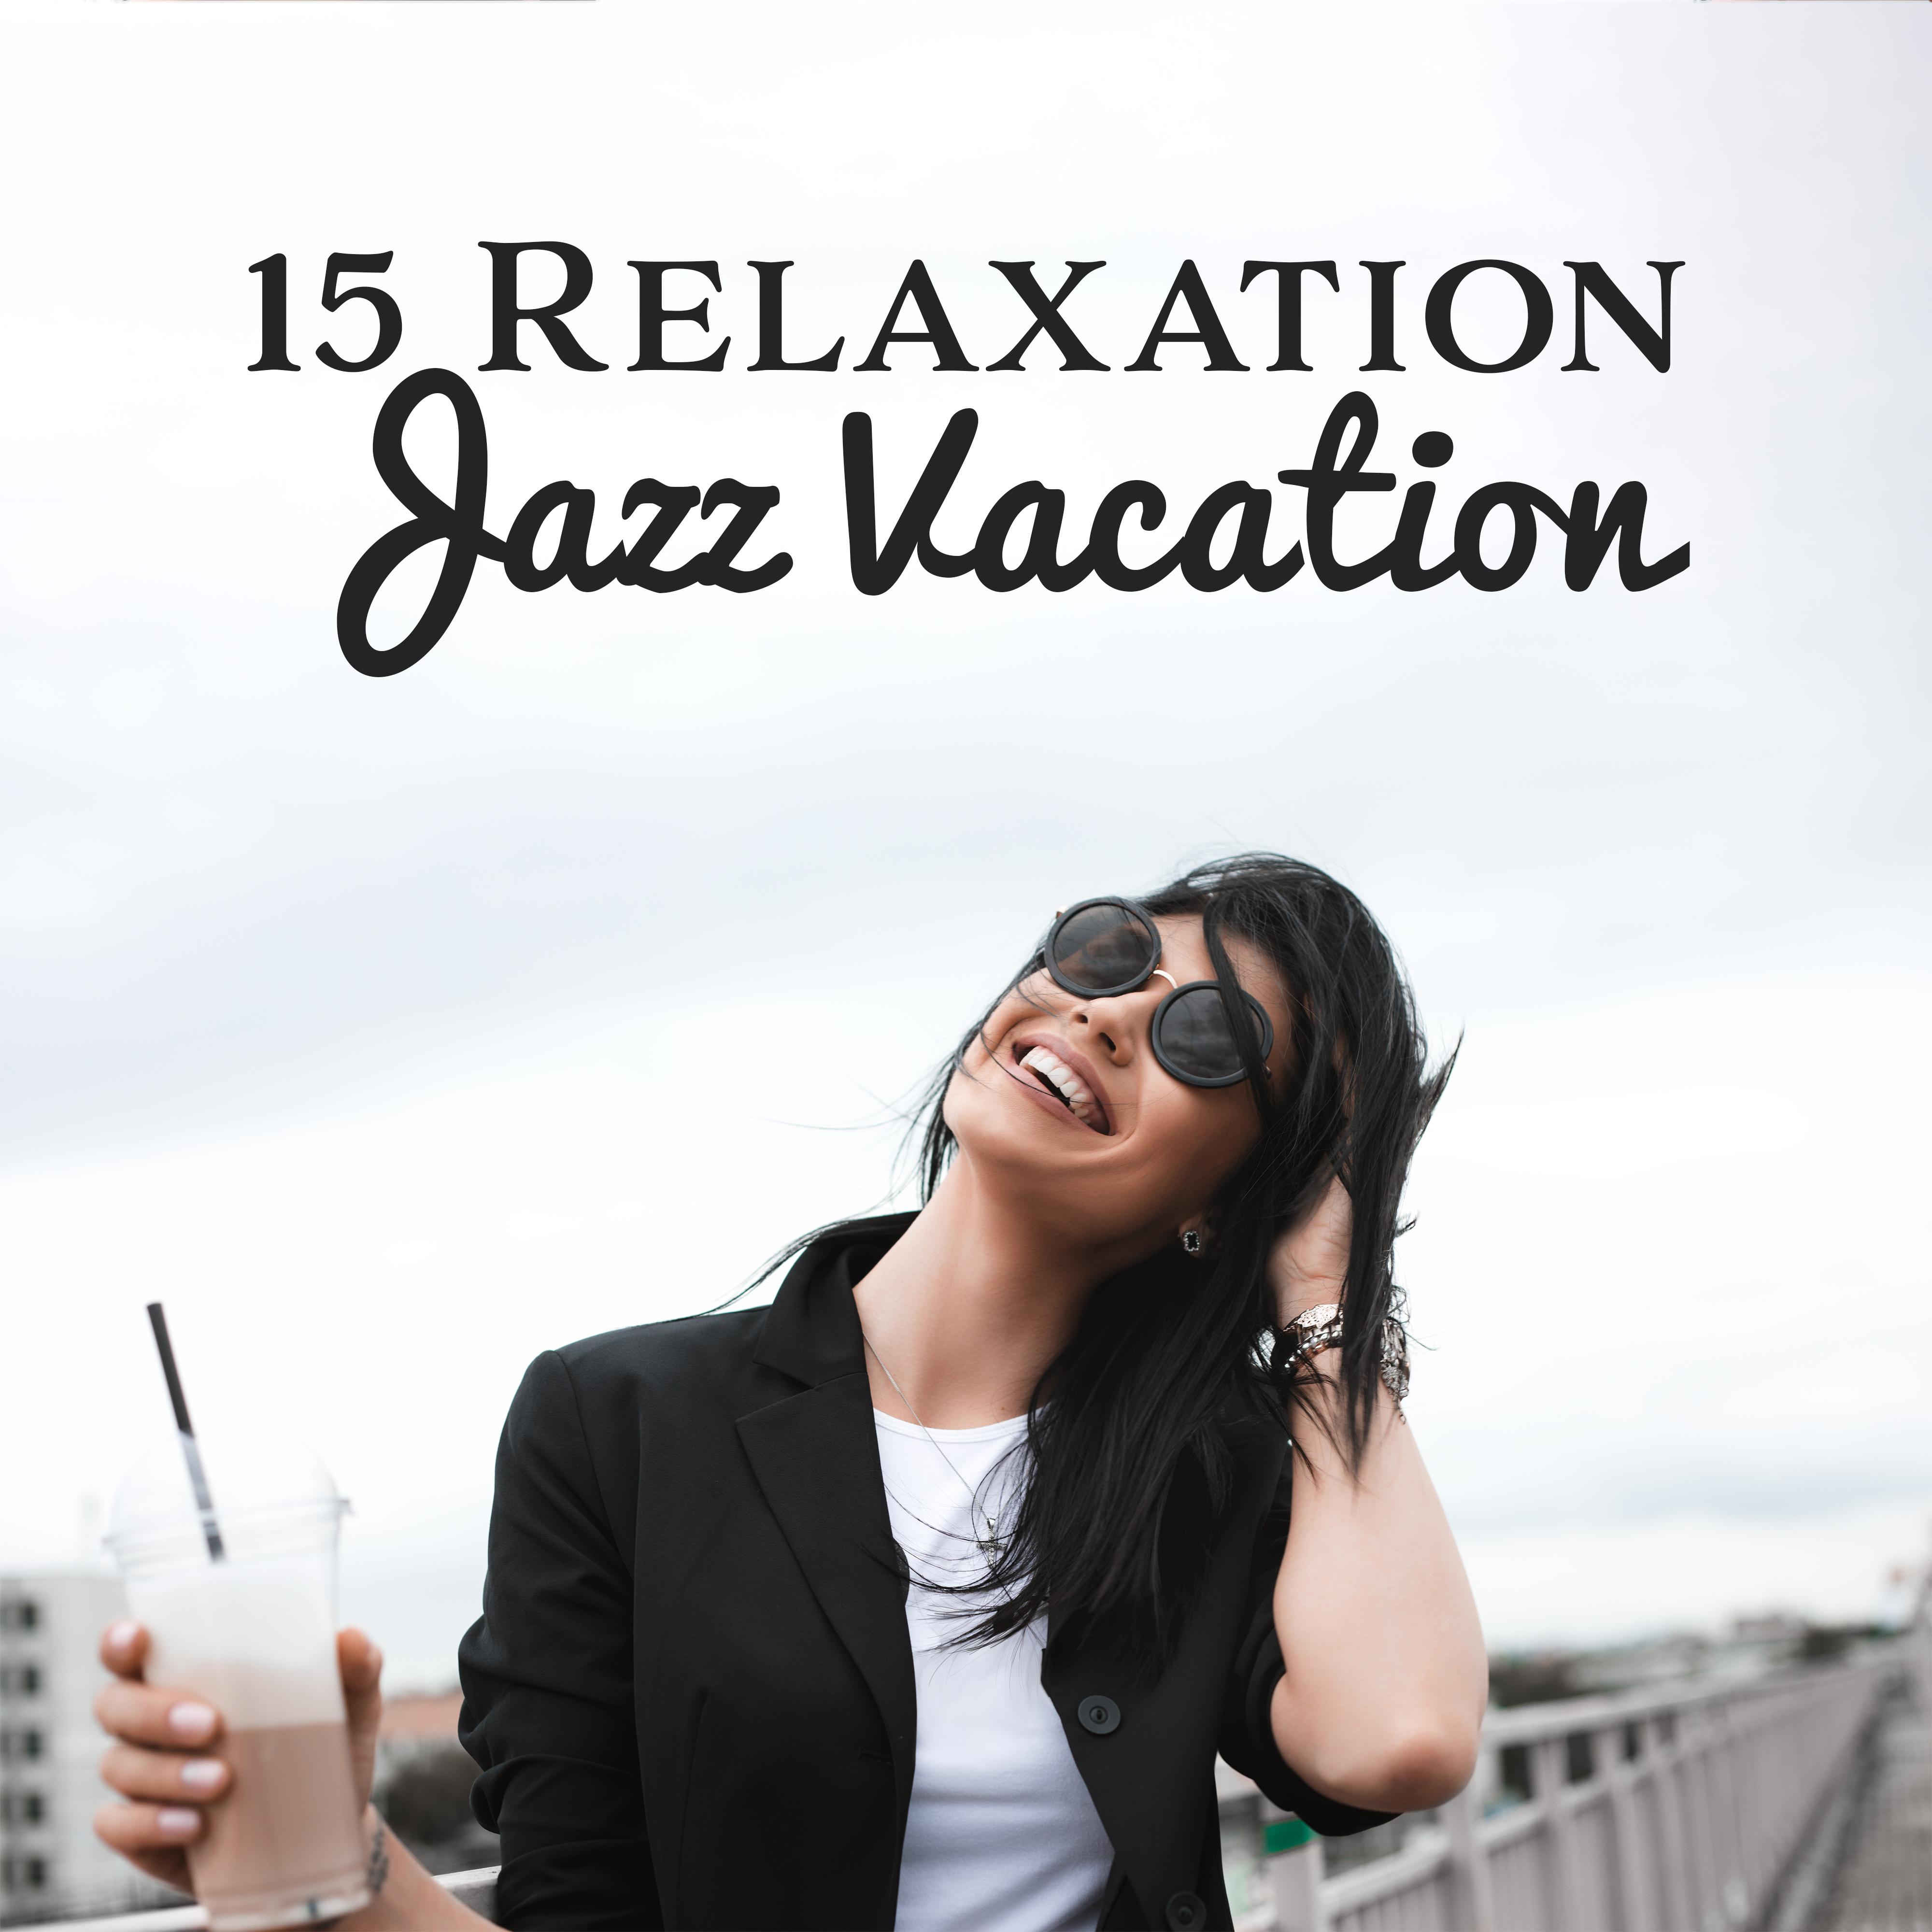 15 Relaxation Jazz Vacation  Smooth Music 2019, Instrumental Jazz to Calm Down, Jazz Vibes, Relax Zone